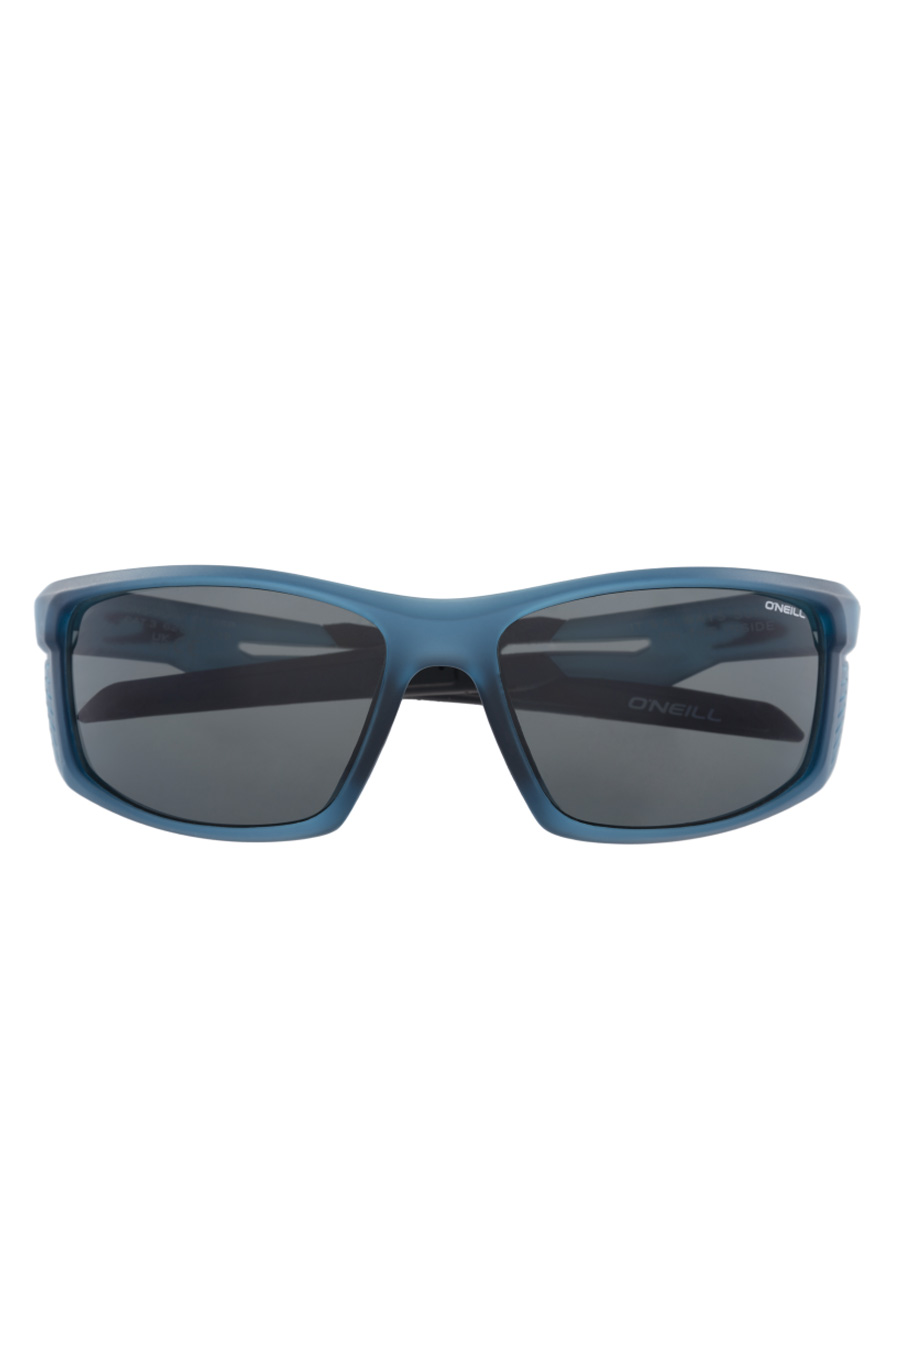 Saulesbrilles ONEILL ONS-9002-20-105P